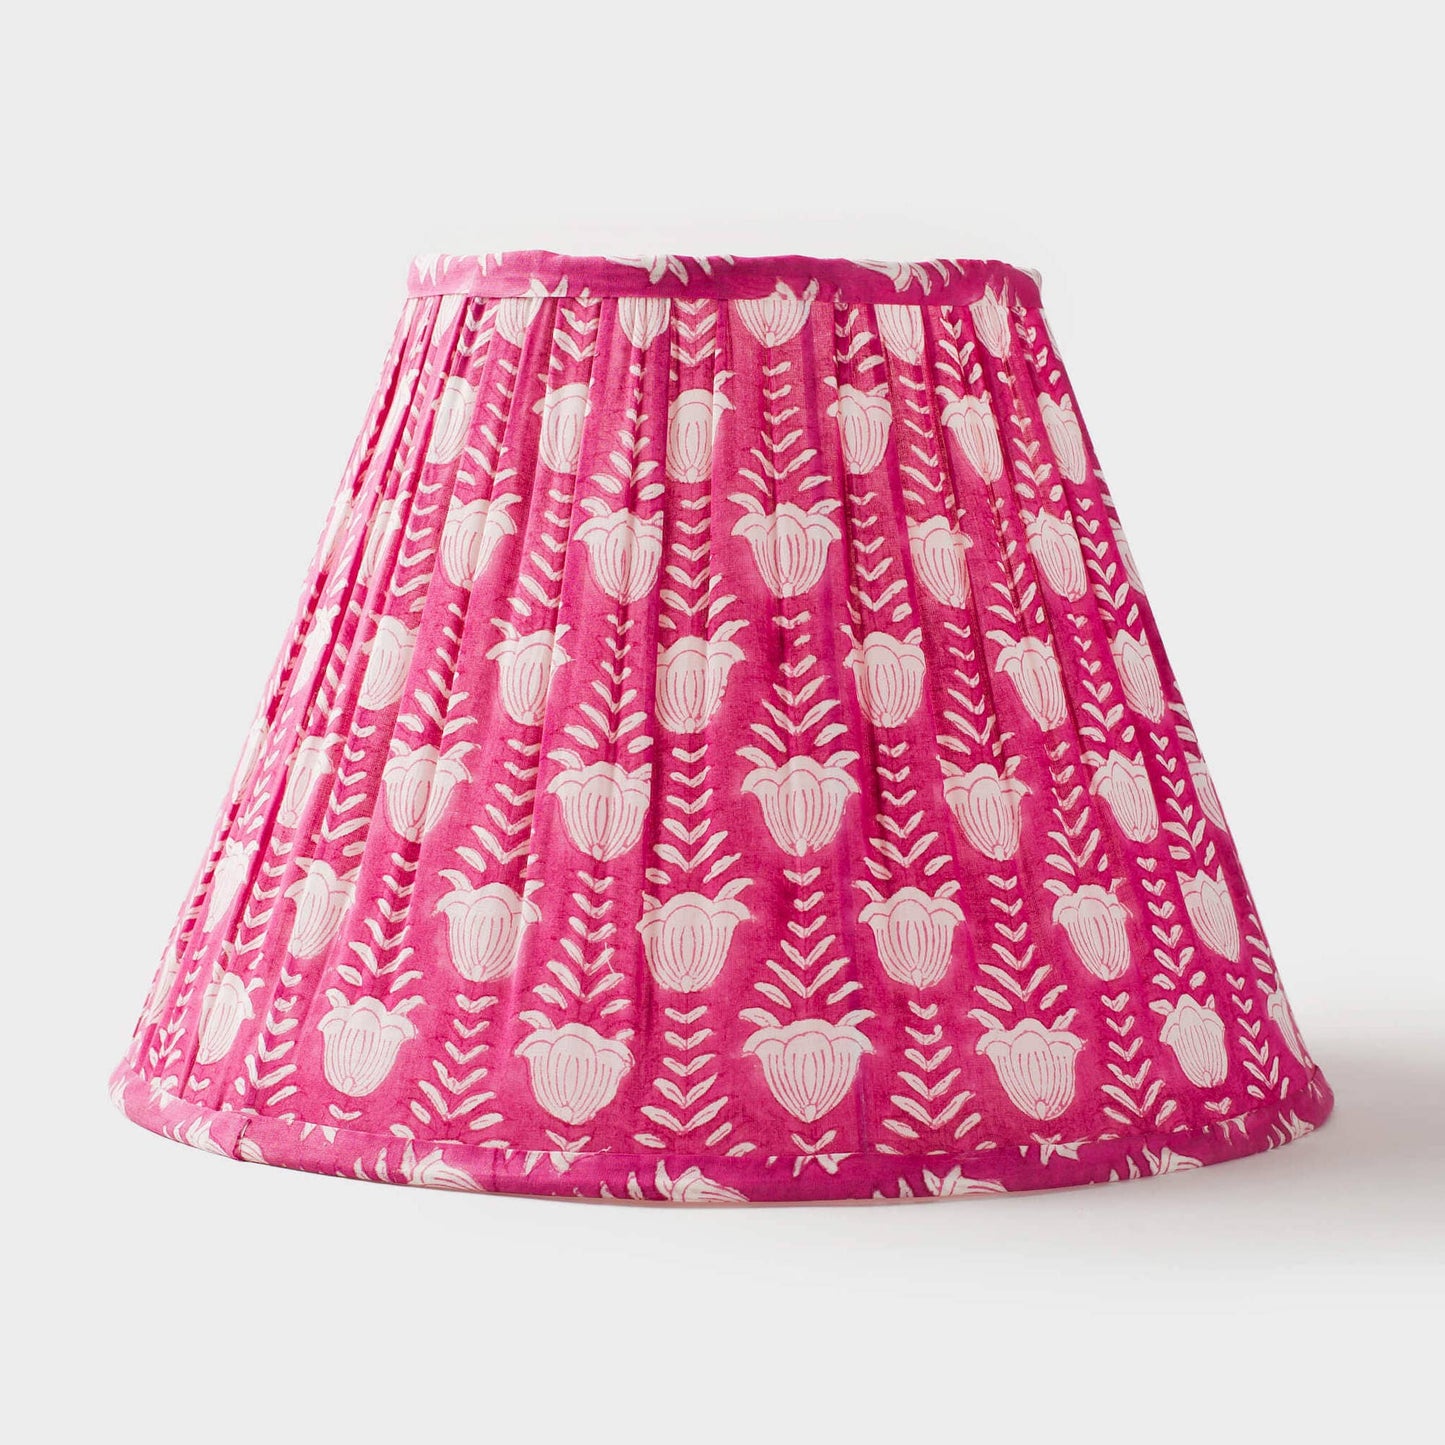 Tulip Gathered Floral Lampshade - Crystal Conner Design